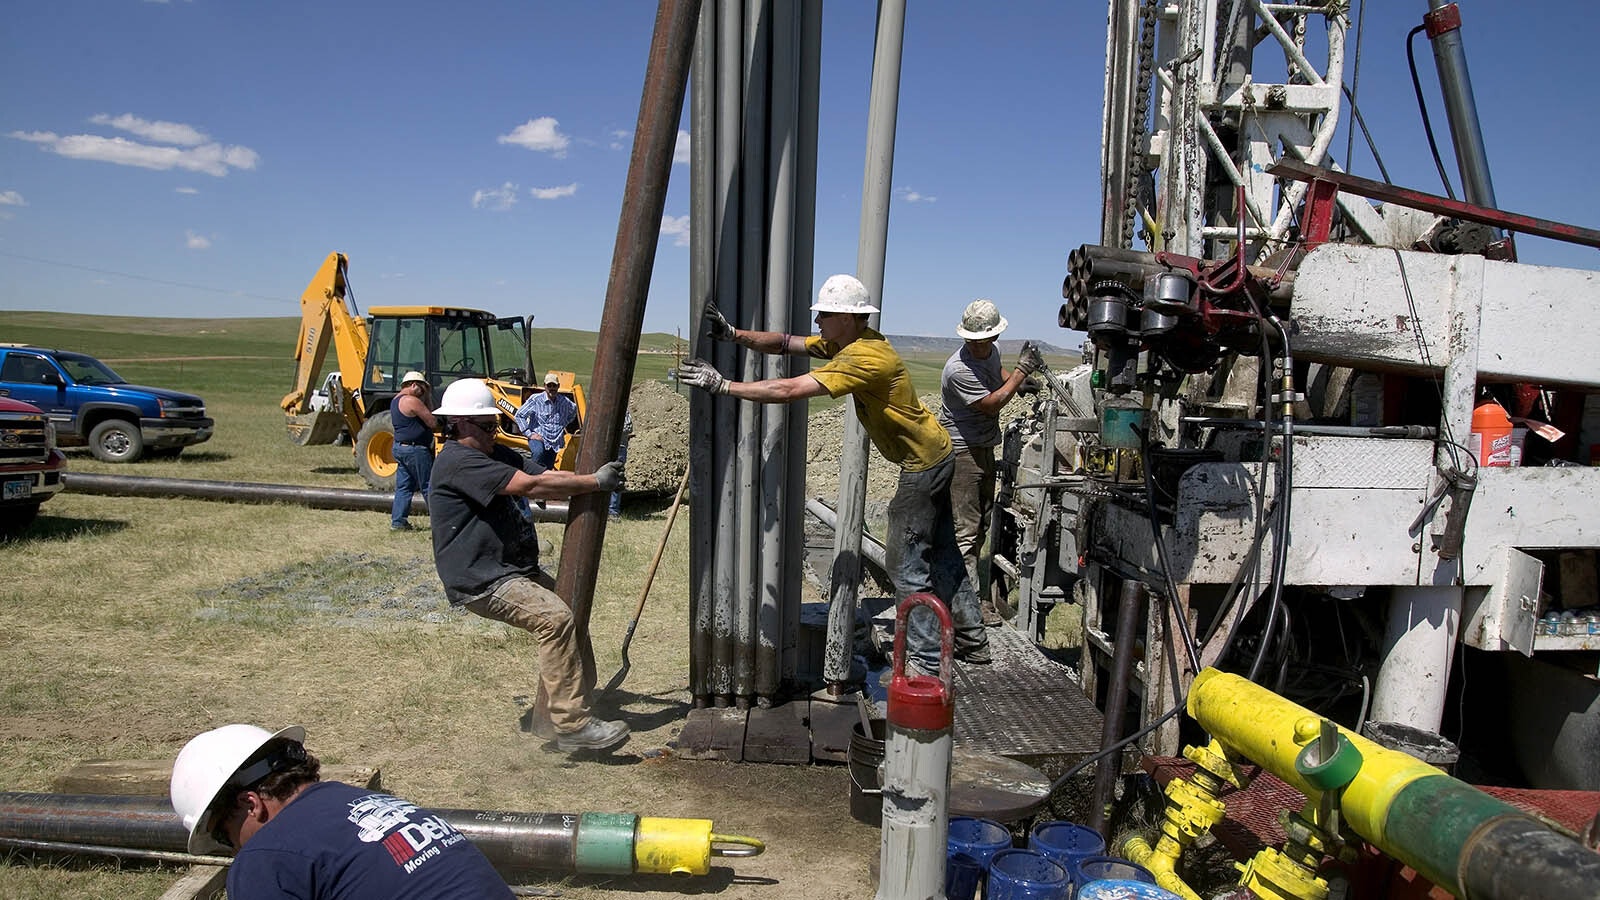 Drilling hands prepare to tighten 10-inch metal pipe casing that will be connected and fitted into a drilled well in Wyoming's northeastern Powder River Basin south of Gillette in this file photo.